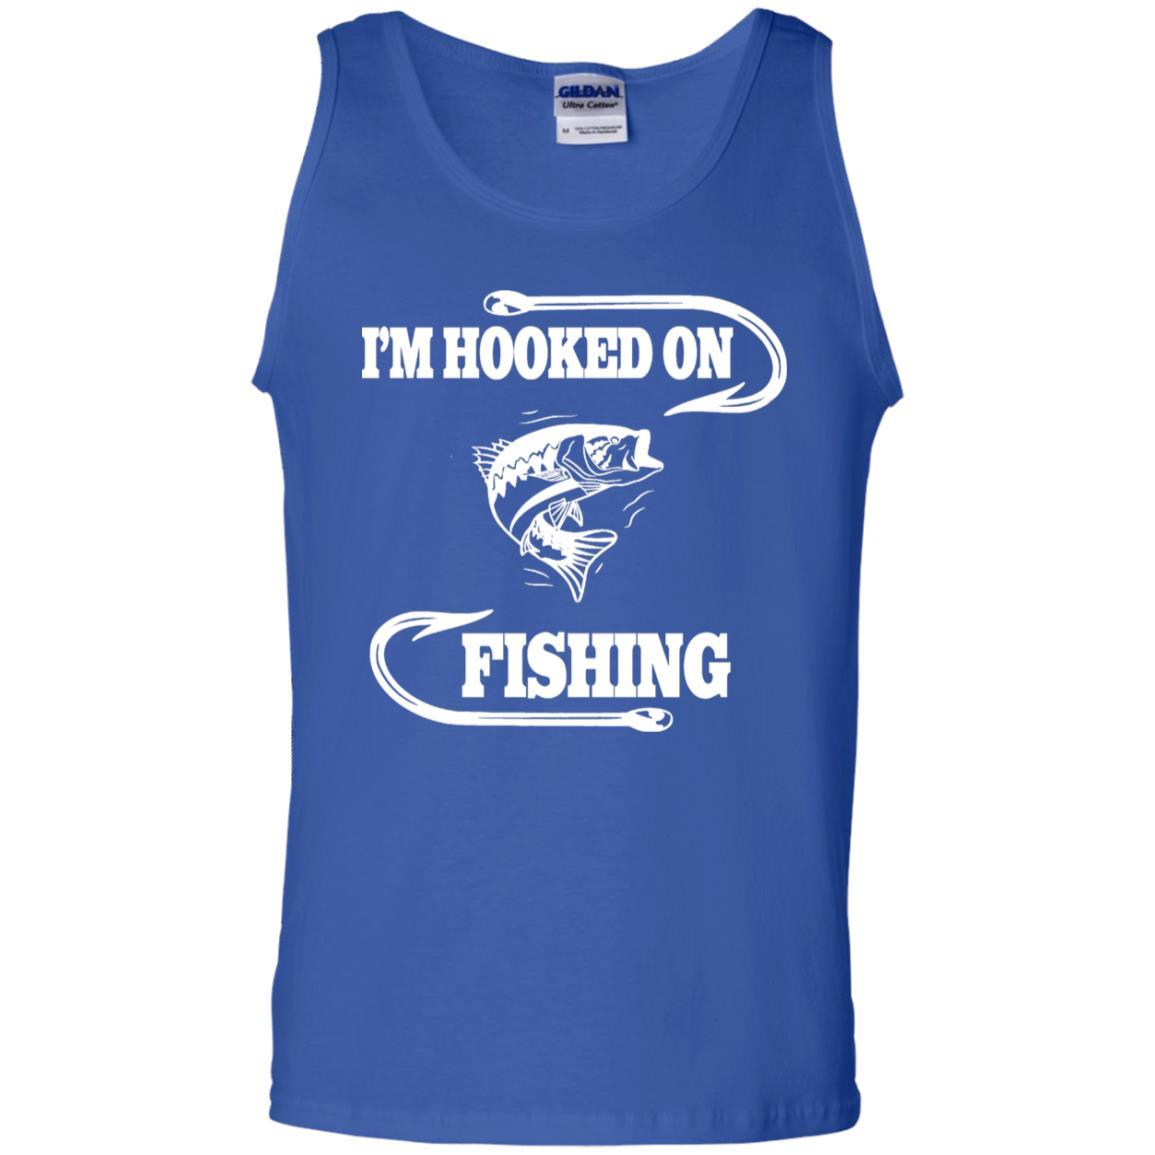 I'm hooked on fishing tank top w royal